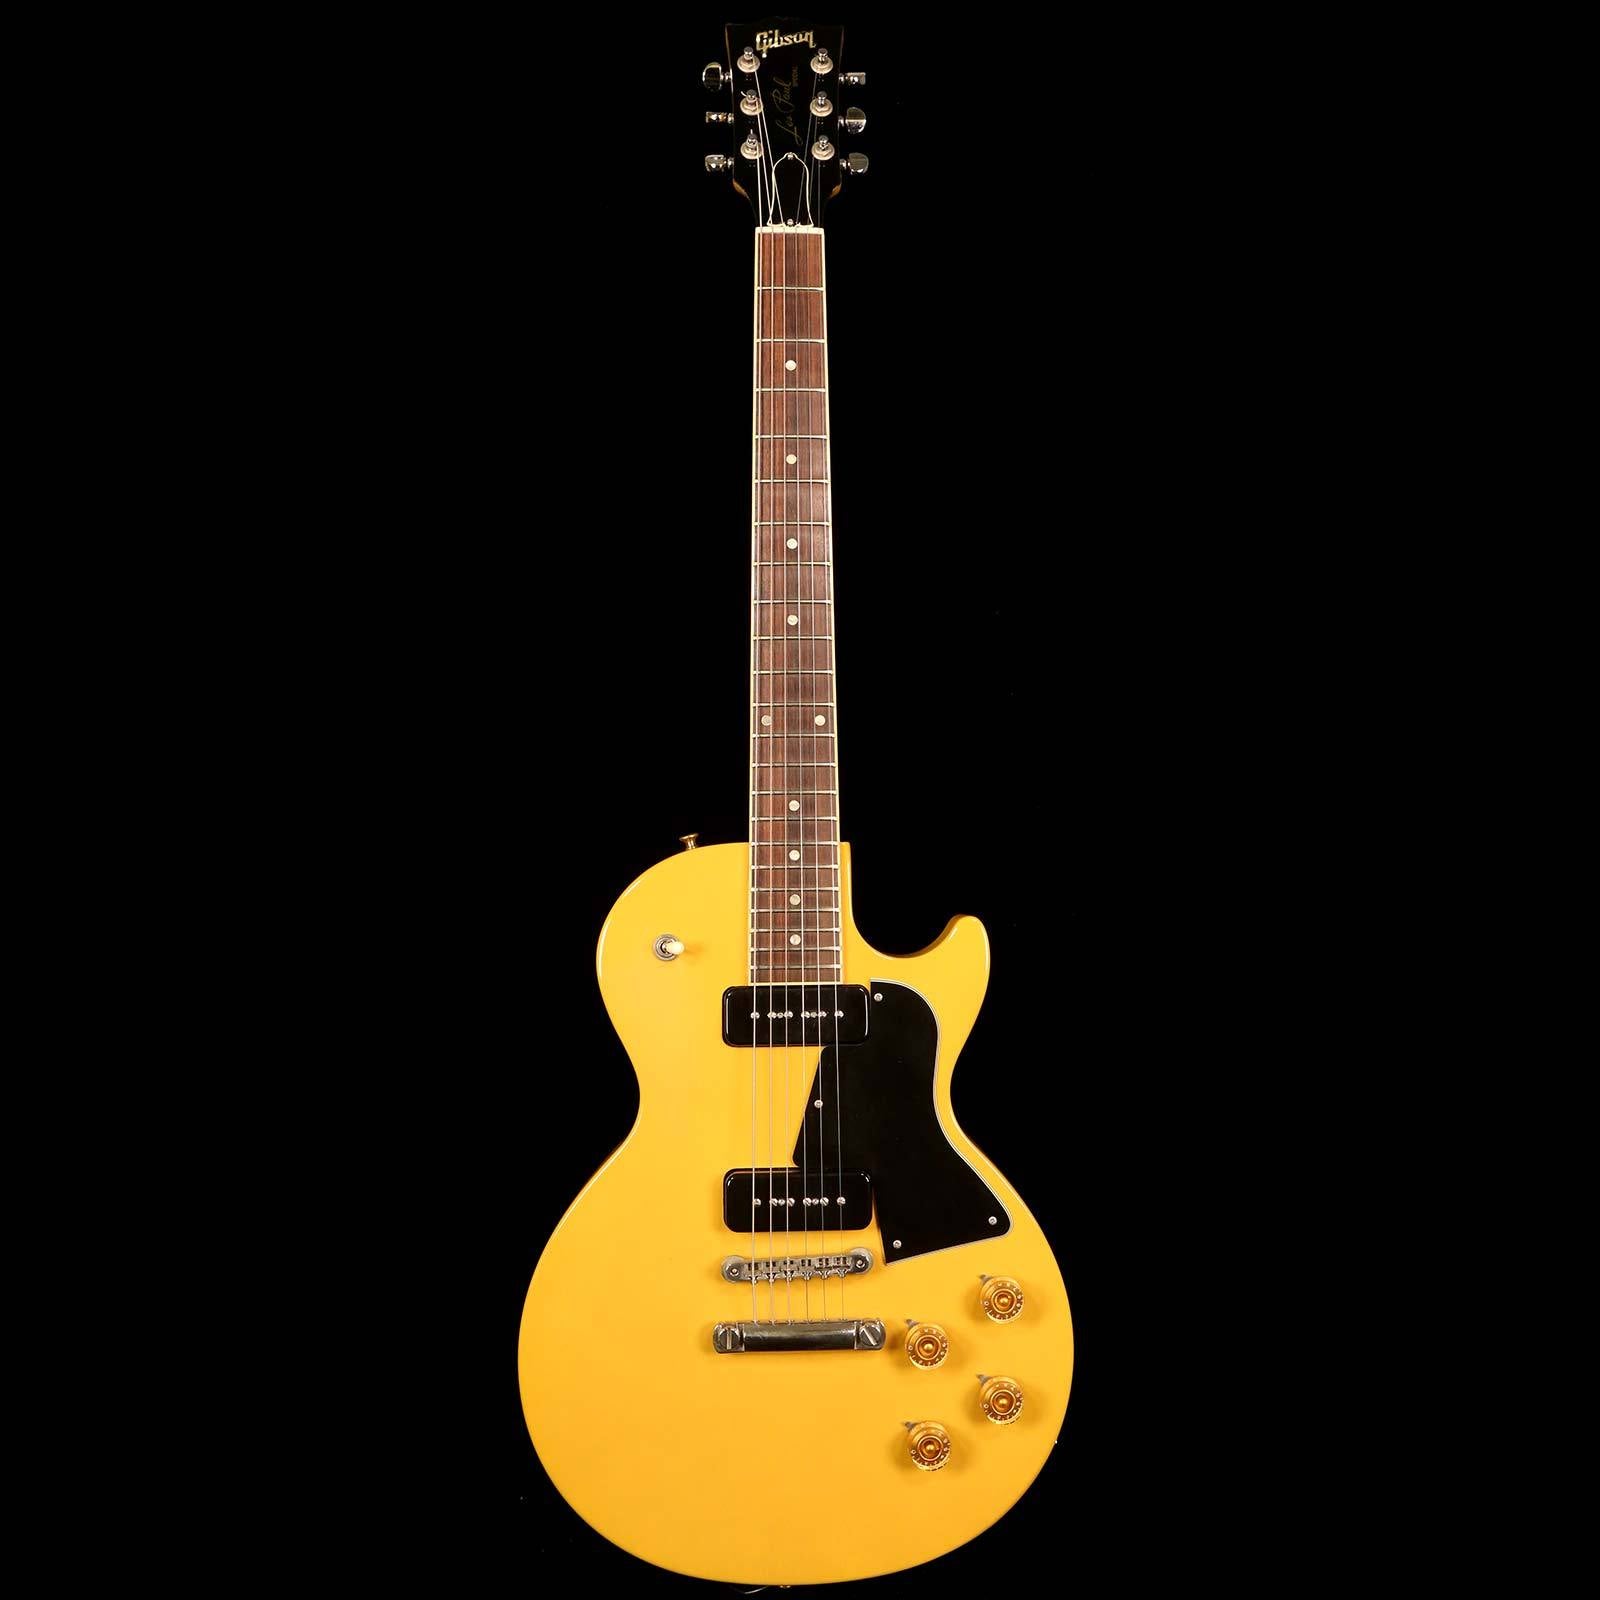 Gibson Les Paul Special Single Cut TV Yellow 1996 | The Music Zoo